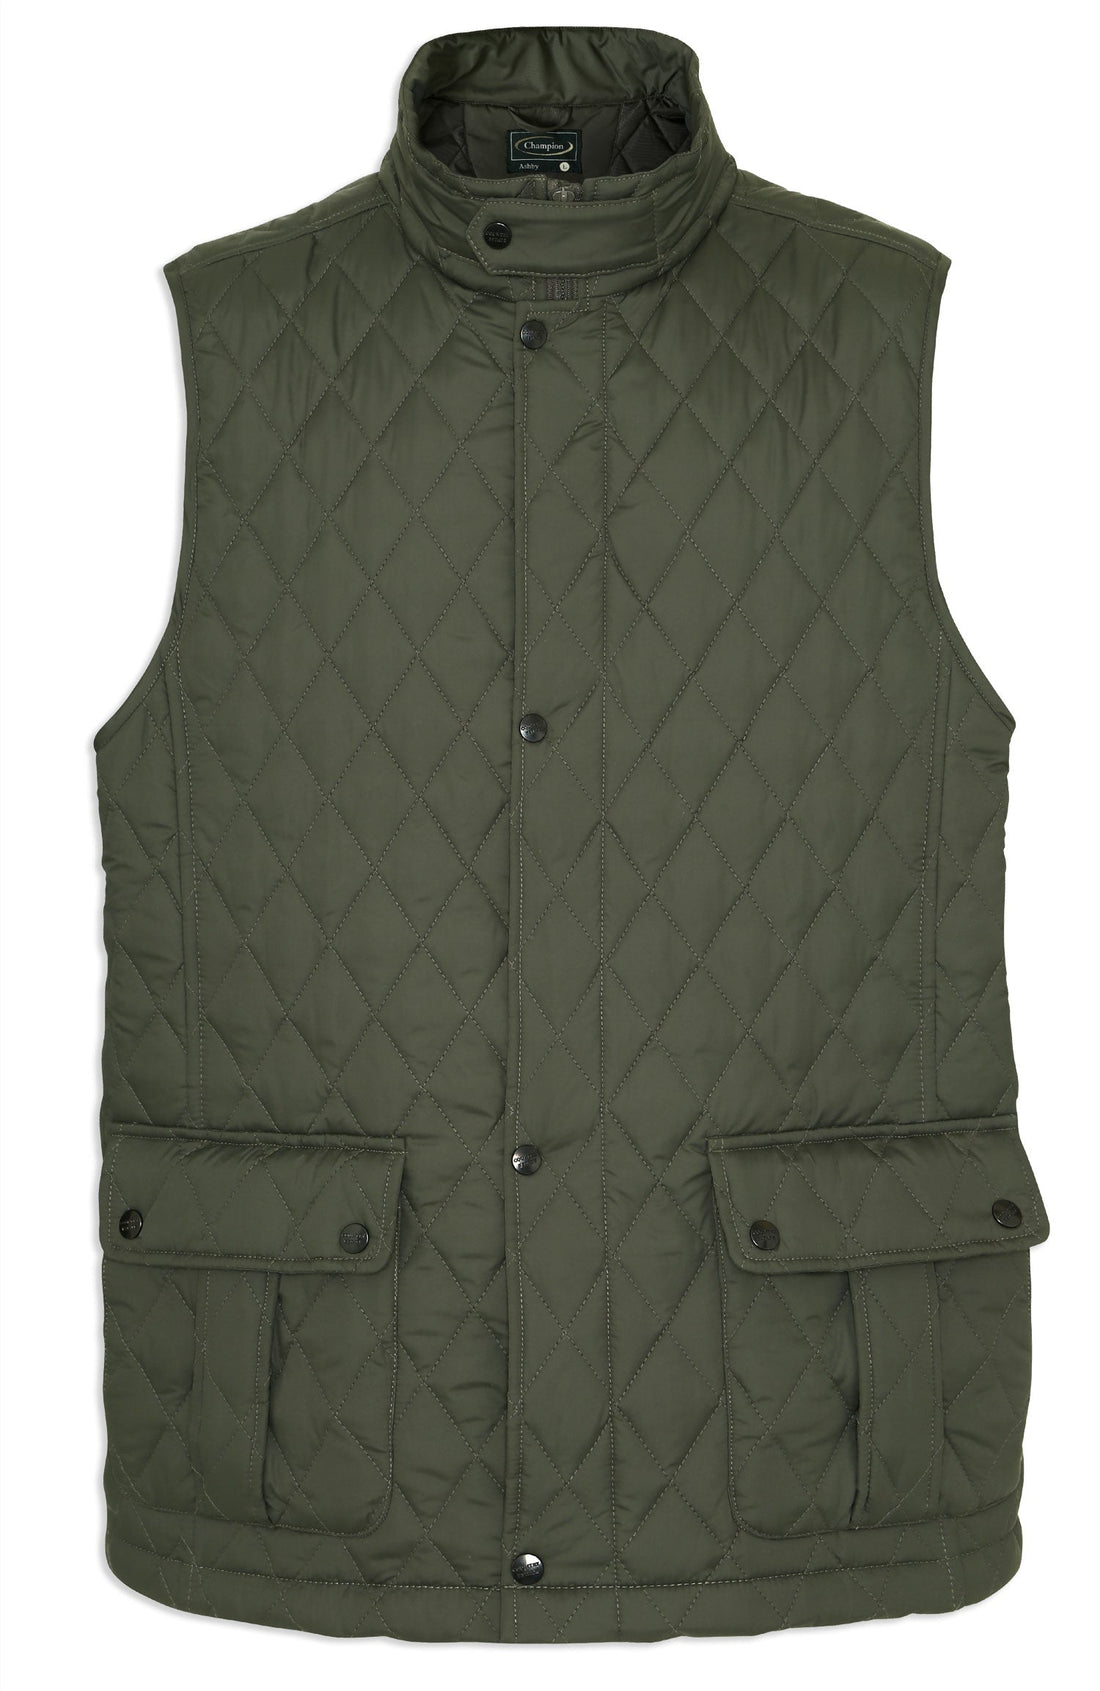 Ashy Champion quilted body warmer